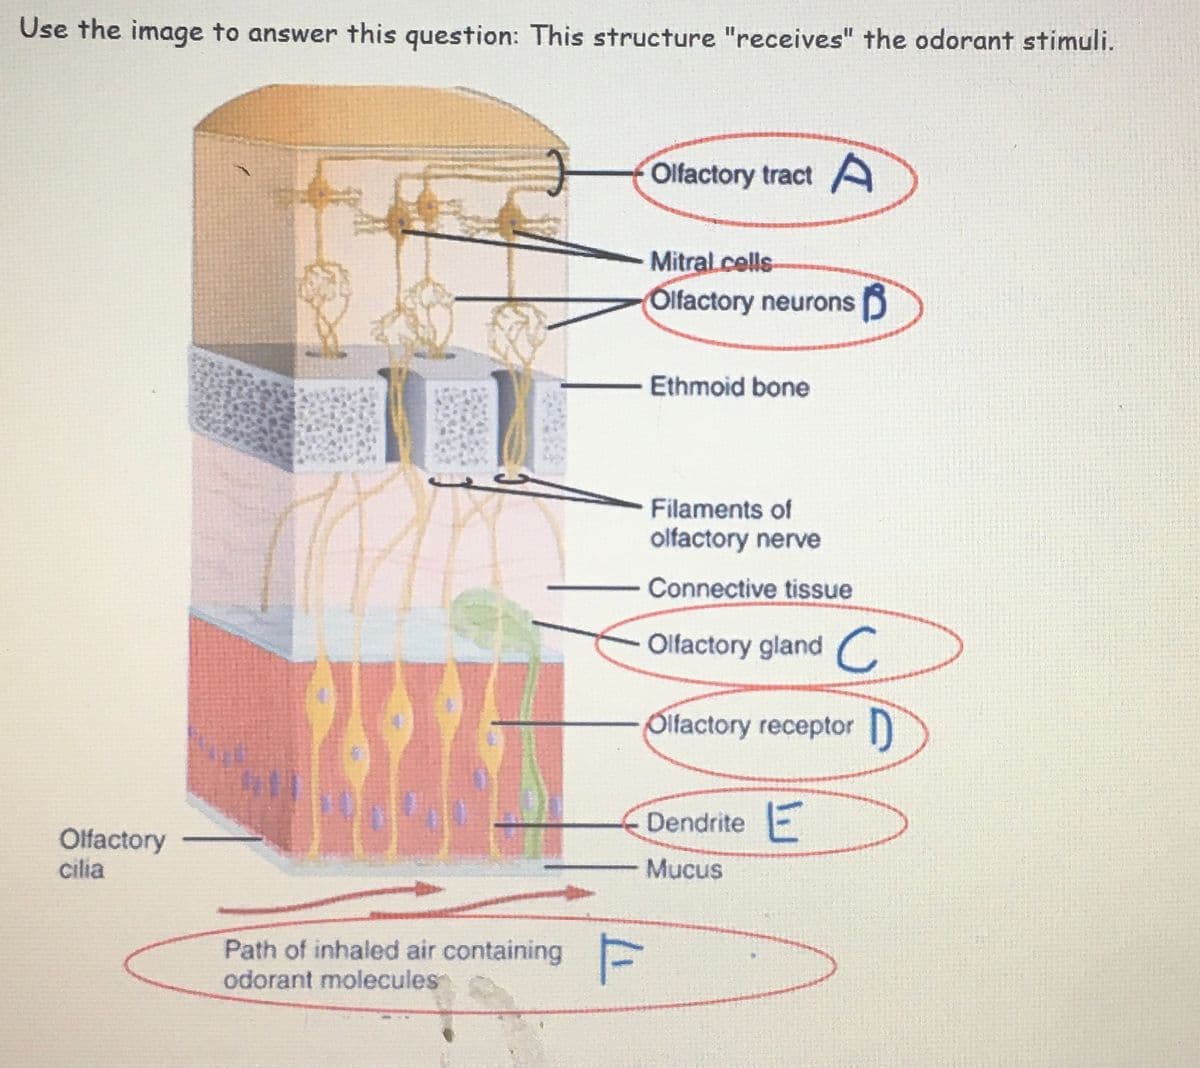 Use the image to answer this question: This structure "receives" the odorant stimuli.
Olfactory
cilia
Path of inhaled air containing F
odorant molecules
Olfactory tract A
Mitral cells
Olfactory neurons
Ethmoid bone
Filaments of
olfactory nerve
Connective tissue
Olfactory gland C
Olfactory receptor
Dendrite E
Mucus